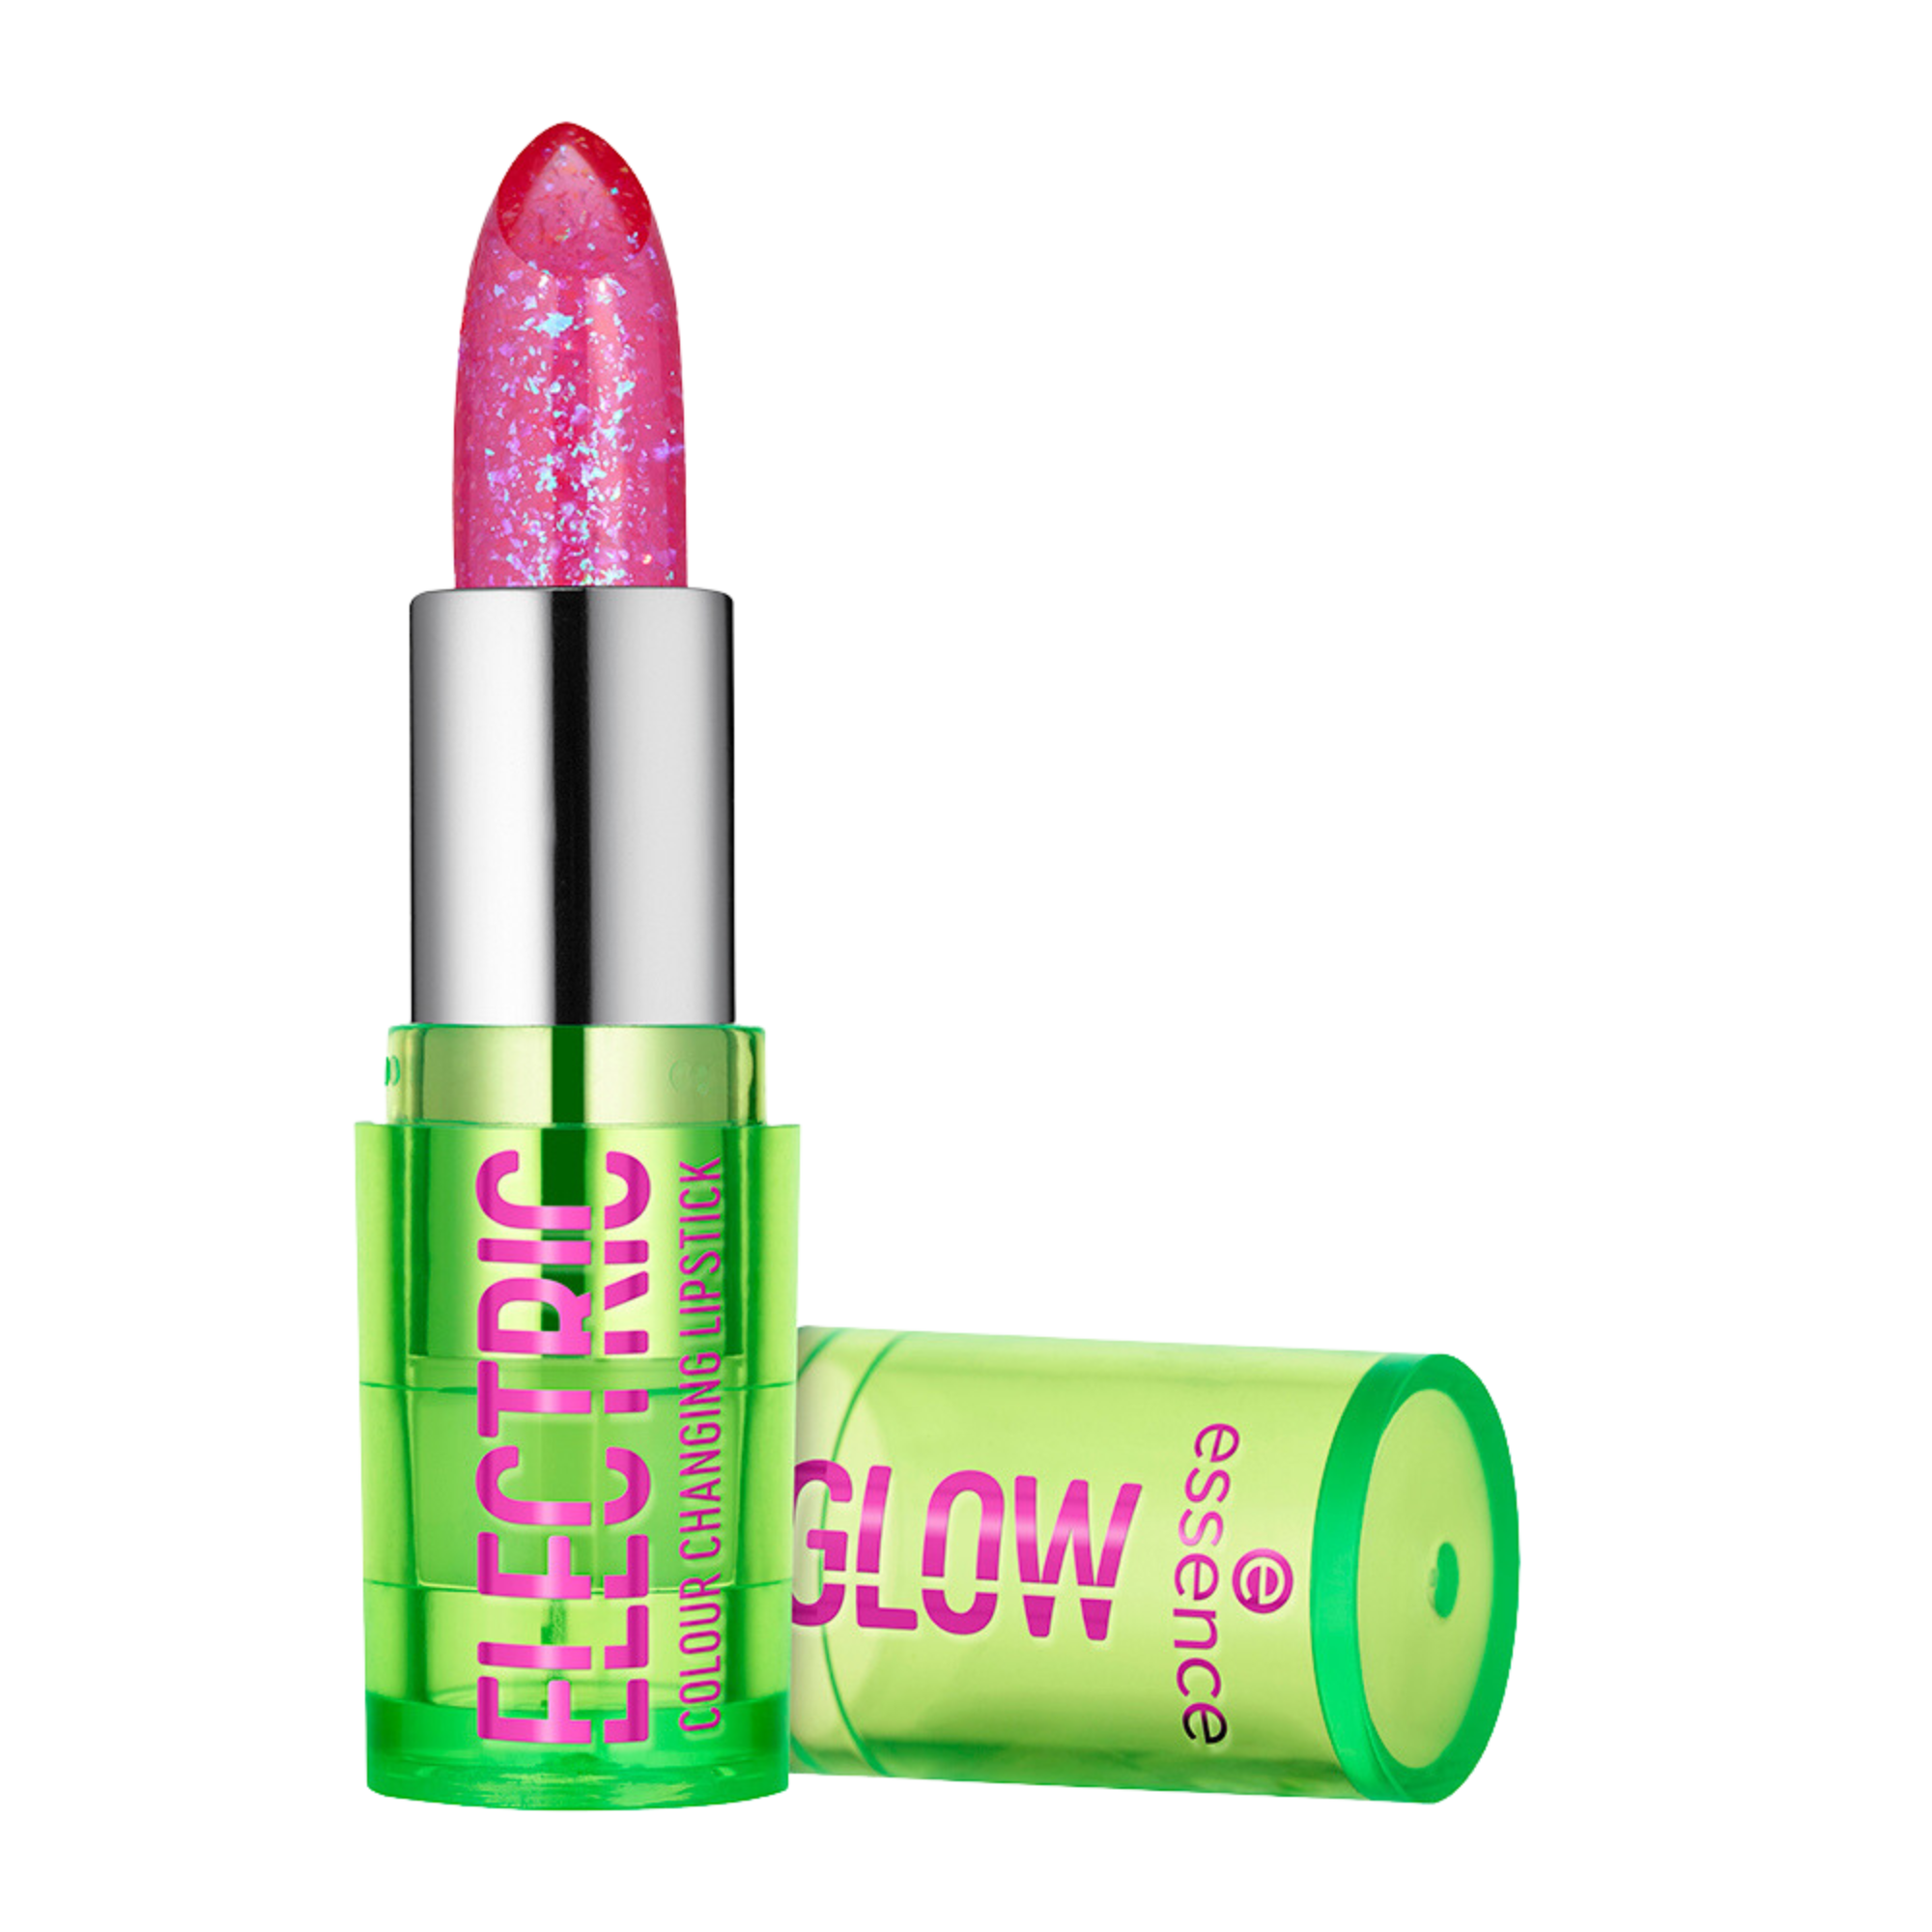 ELECTRIC GLOW color changing lipstick